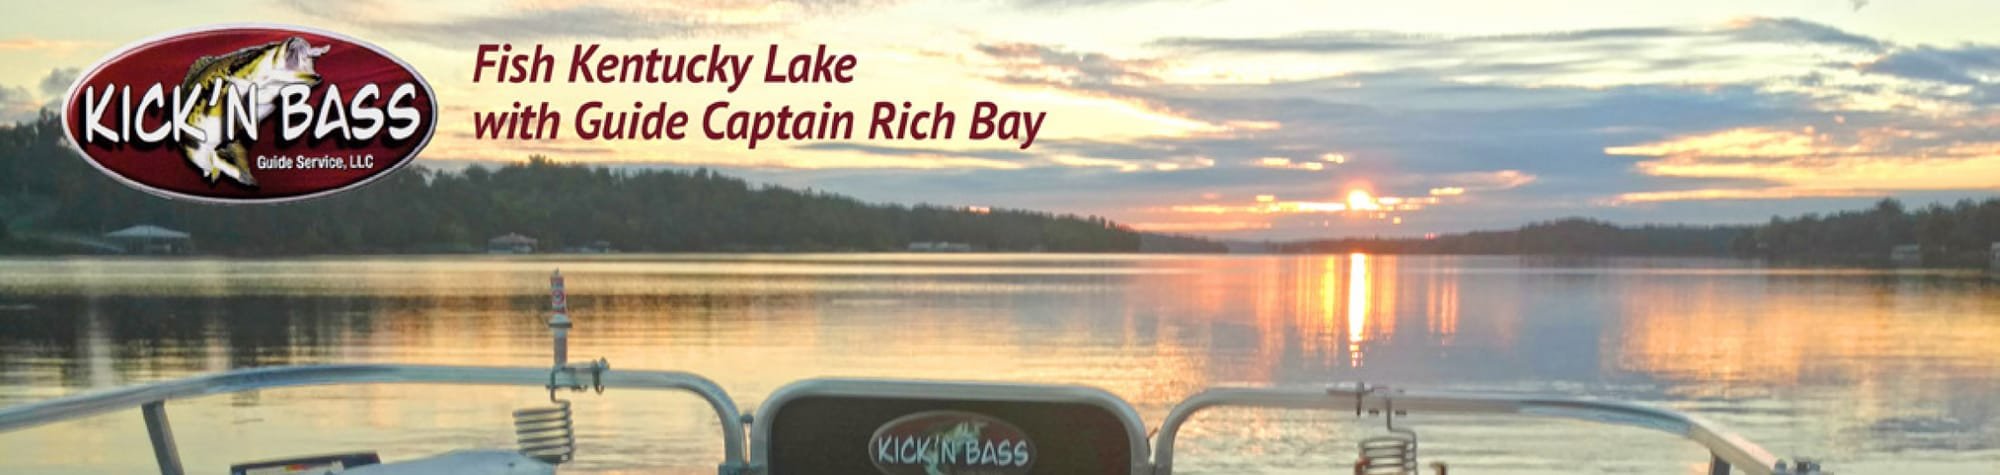 Your Kick'n Bass Fishing Report for July 2, 2019